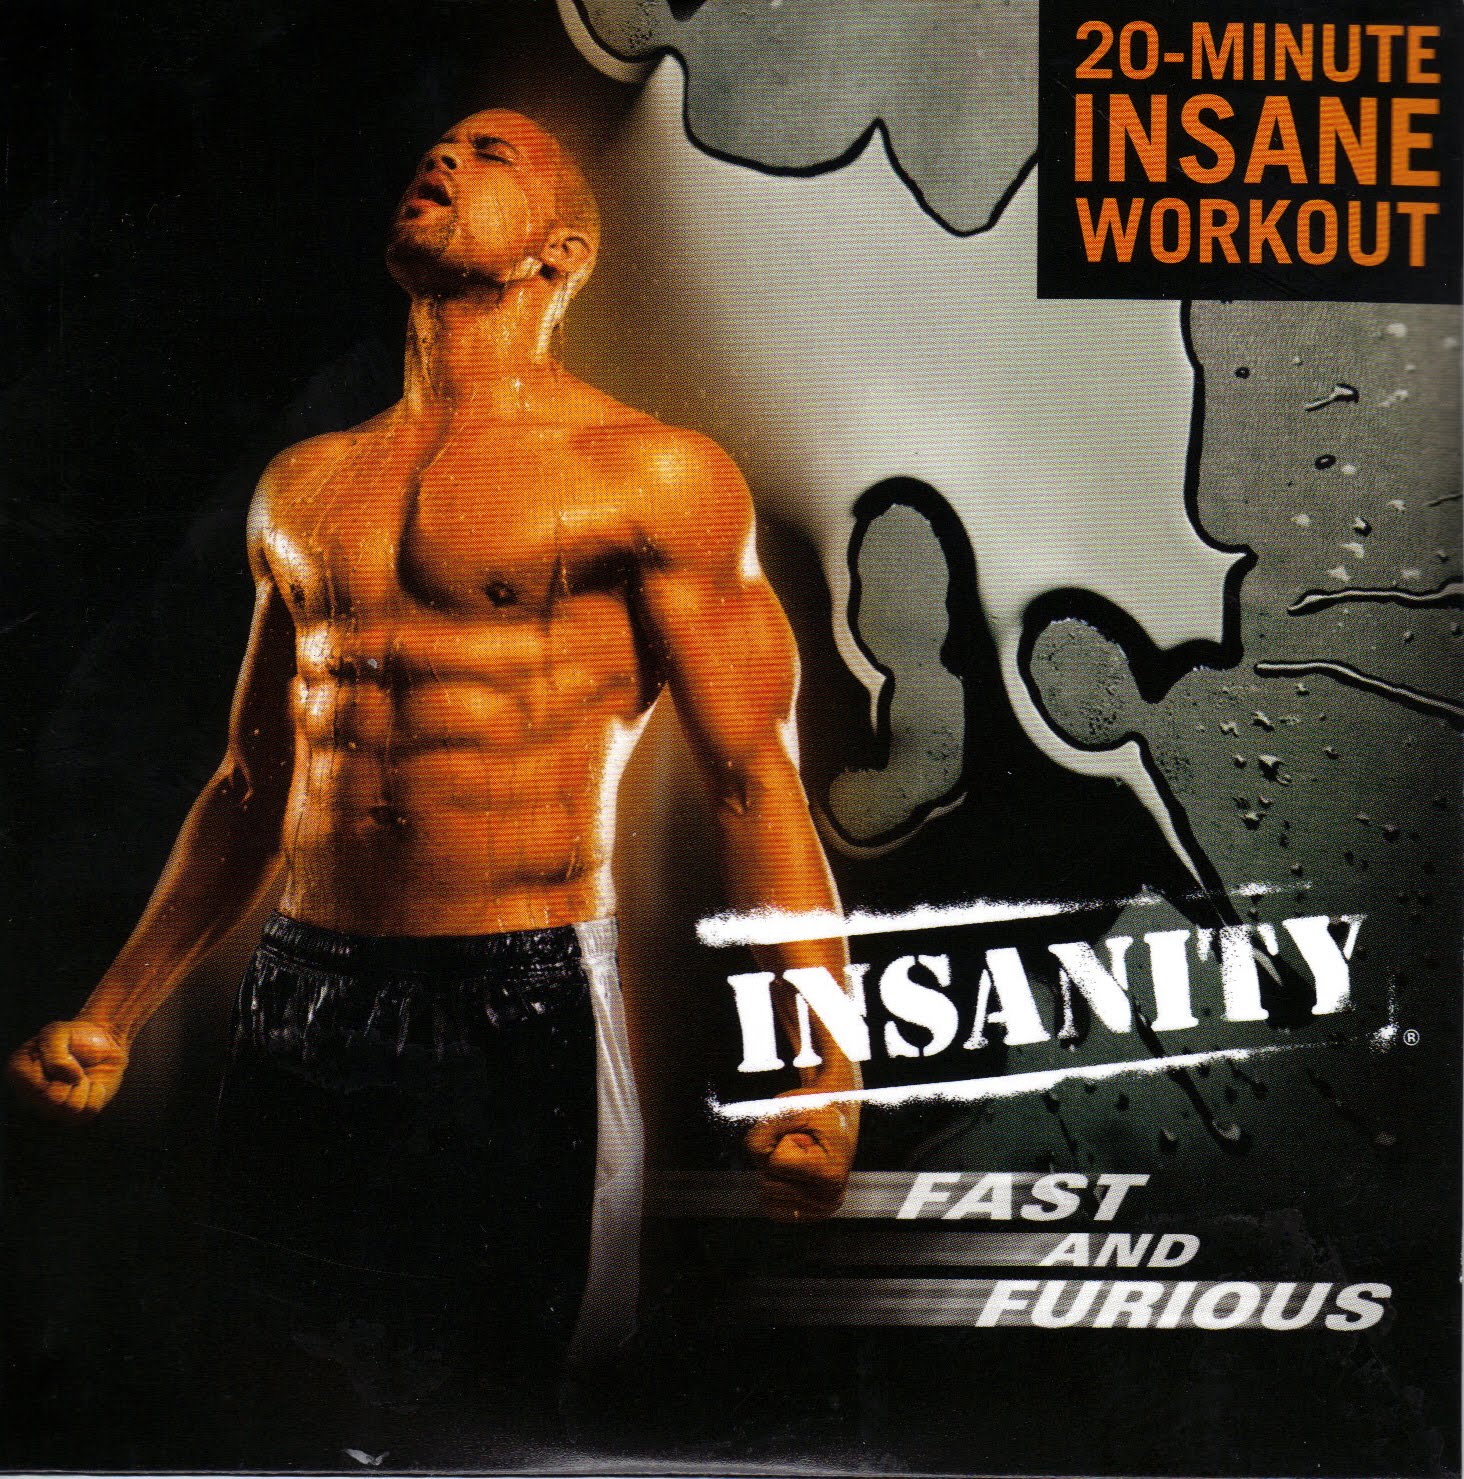 Simple Shaun T Fast And Furious Insanity Workout for Women